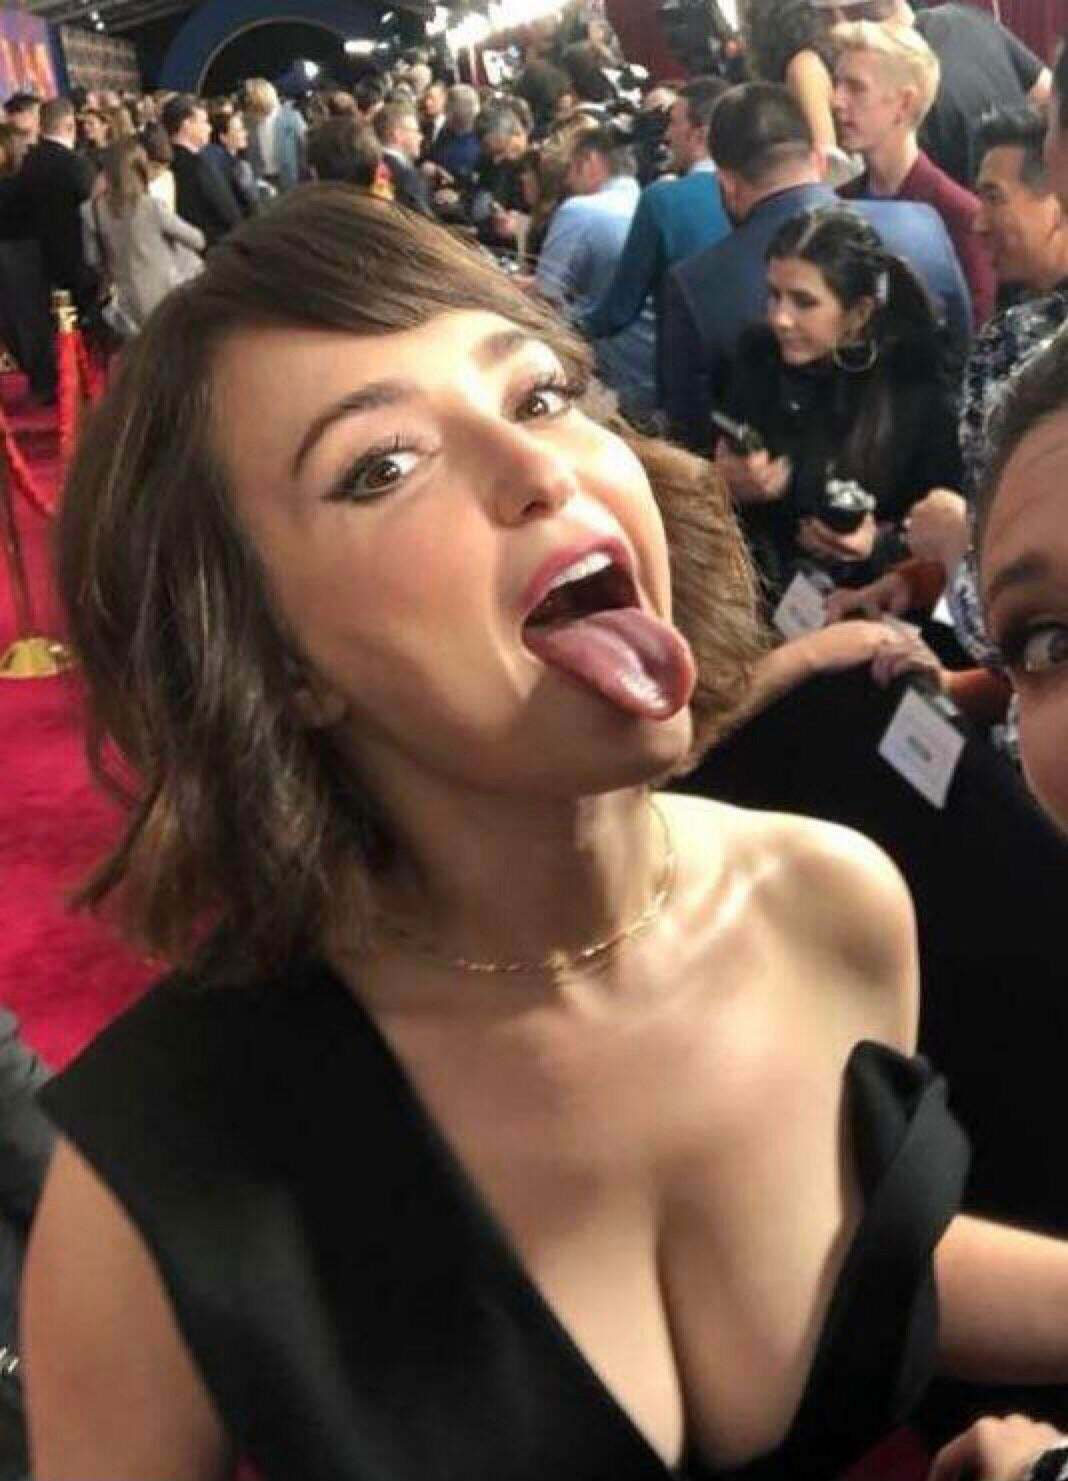 I would give anything for Milana Vayntrub